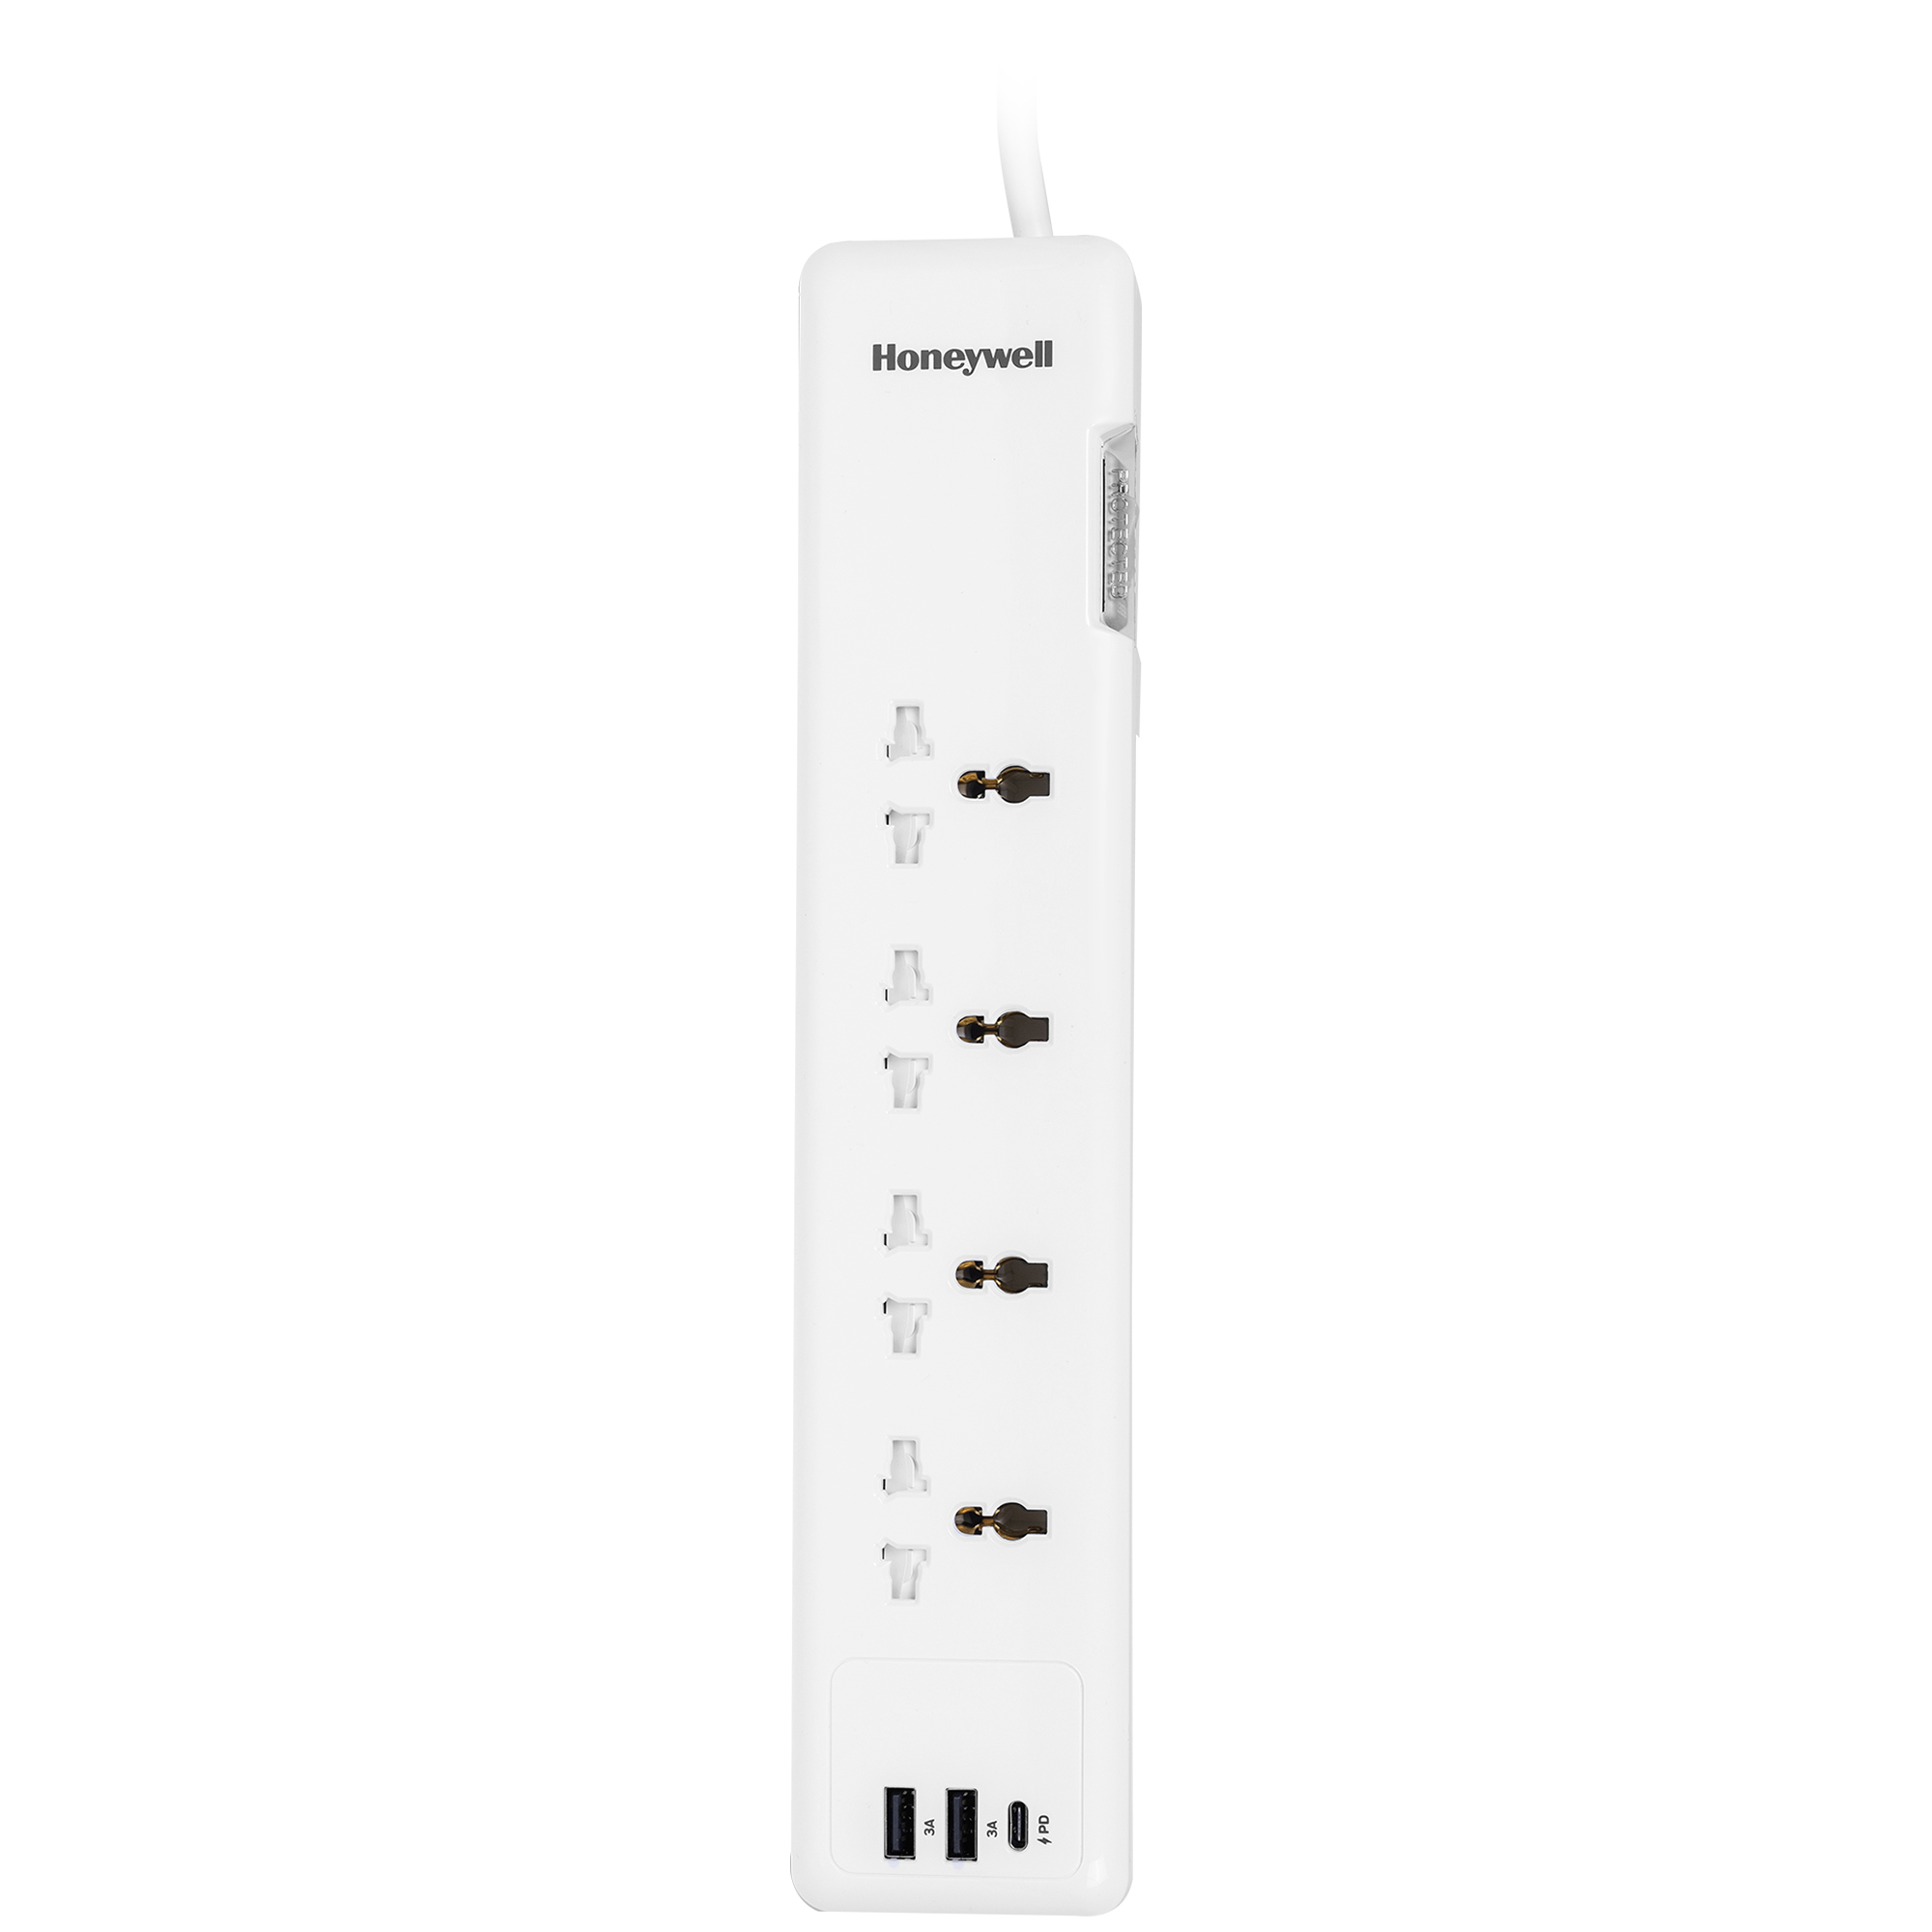 Honeywell Surge Protector with 4 Universal Sockets + 2 USB- A and Type C Port with 1.5 Meter Cord - White